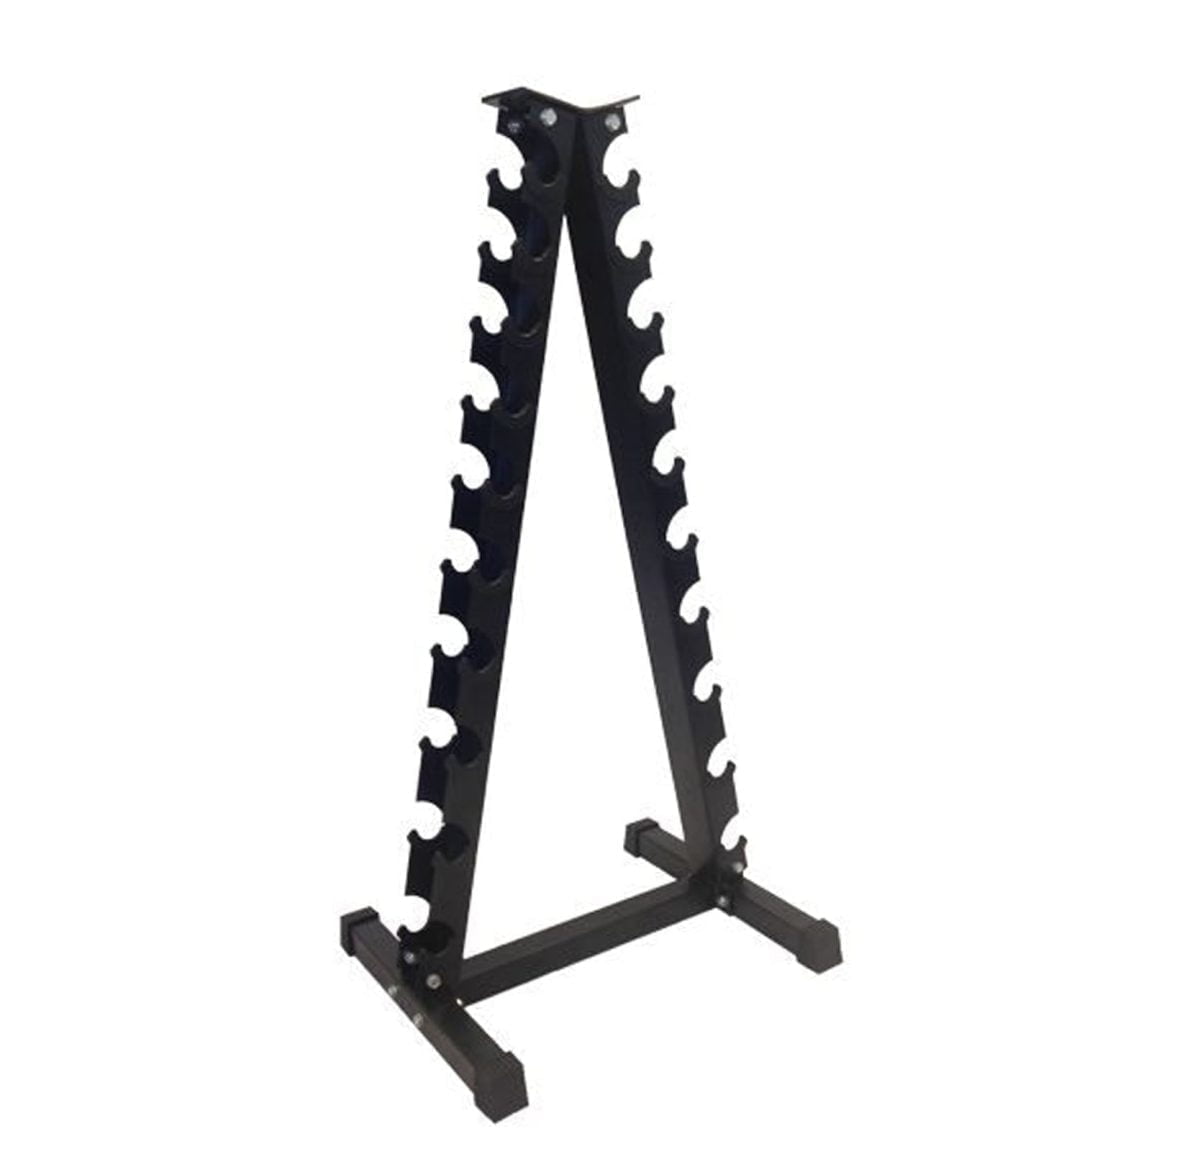 Ta Sports Vertical Dumbbell Rack 10 Pairs 54060105 Labsport &Lt;H1&Gt;Dumbbells Rack Stand&Lt;/H1&Gt; Vertical Dumbbell Rack Is Designed To Fit Your Weights Spic And Span. Prevent The Risk Of The Tripping Hazard And Get More Space In Your Gym Area By Stacking The Weights On The Rack That Comes With The Smallest Footprint! Plus, Transform Your Fitness Space Into An Organized Area! &Lt;Ul&Gt; &Lt;Li&Gt;Suitable For Rubber Hex Or Vinyl Dumbbells&Lt;/Li&Gt; &Lt;Li&Gt;Heavy Duty Box Steel Construction&Lt;/Li&Gt; &Lt;Li&Gt;Nylon Cradle Covers To Protect Dumbbells&Lt;/Li&Gt; &Lt;Li&Gt;Rubber Pad To Protect The Floor&Lt;/Li&Gt; &Lt;Li&Gt;Dark Grey Finish&Lt;/Li&Gt; &Lt;/Ul&Gt; Dumbbells Rack Stand